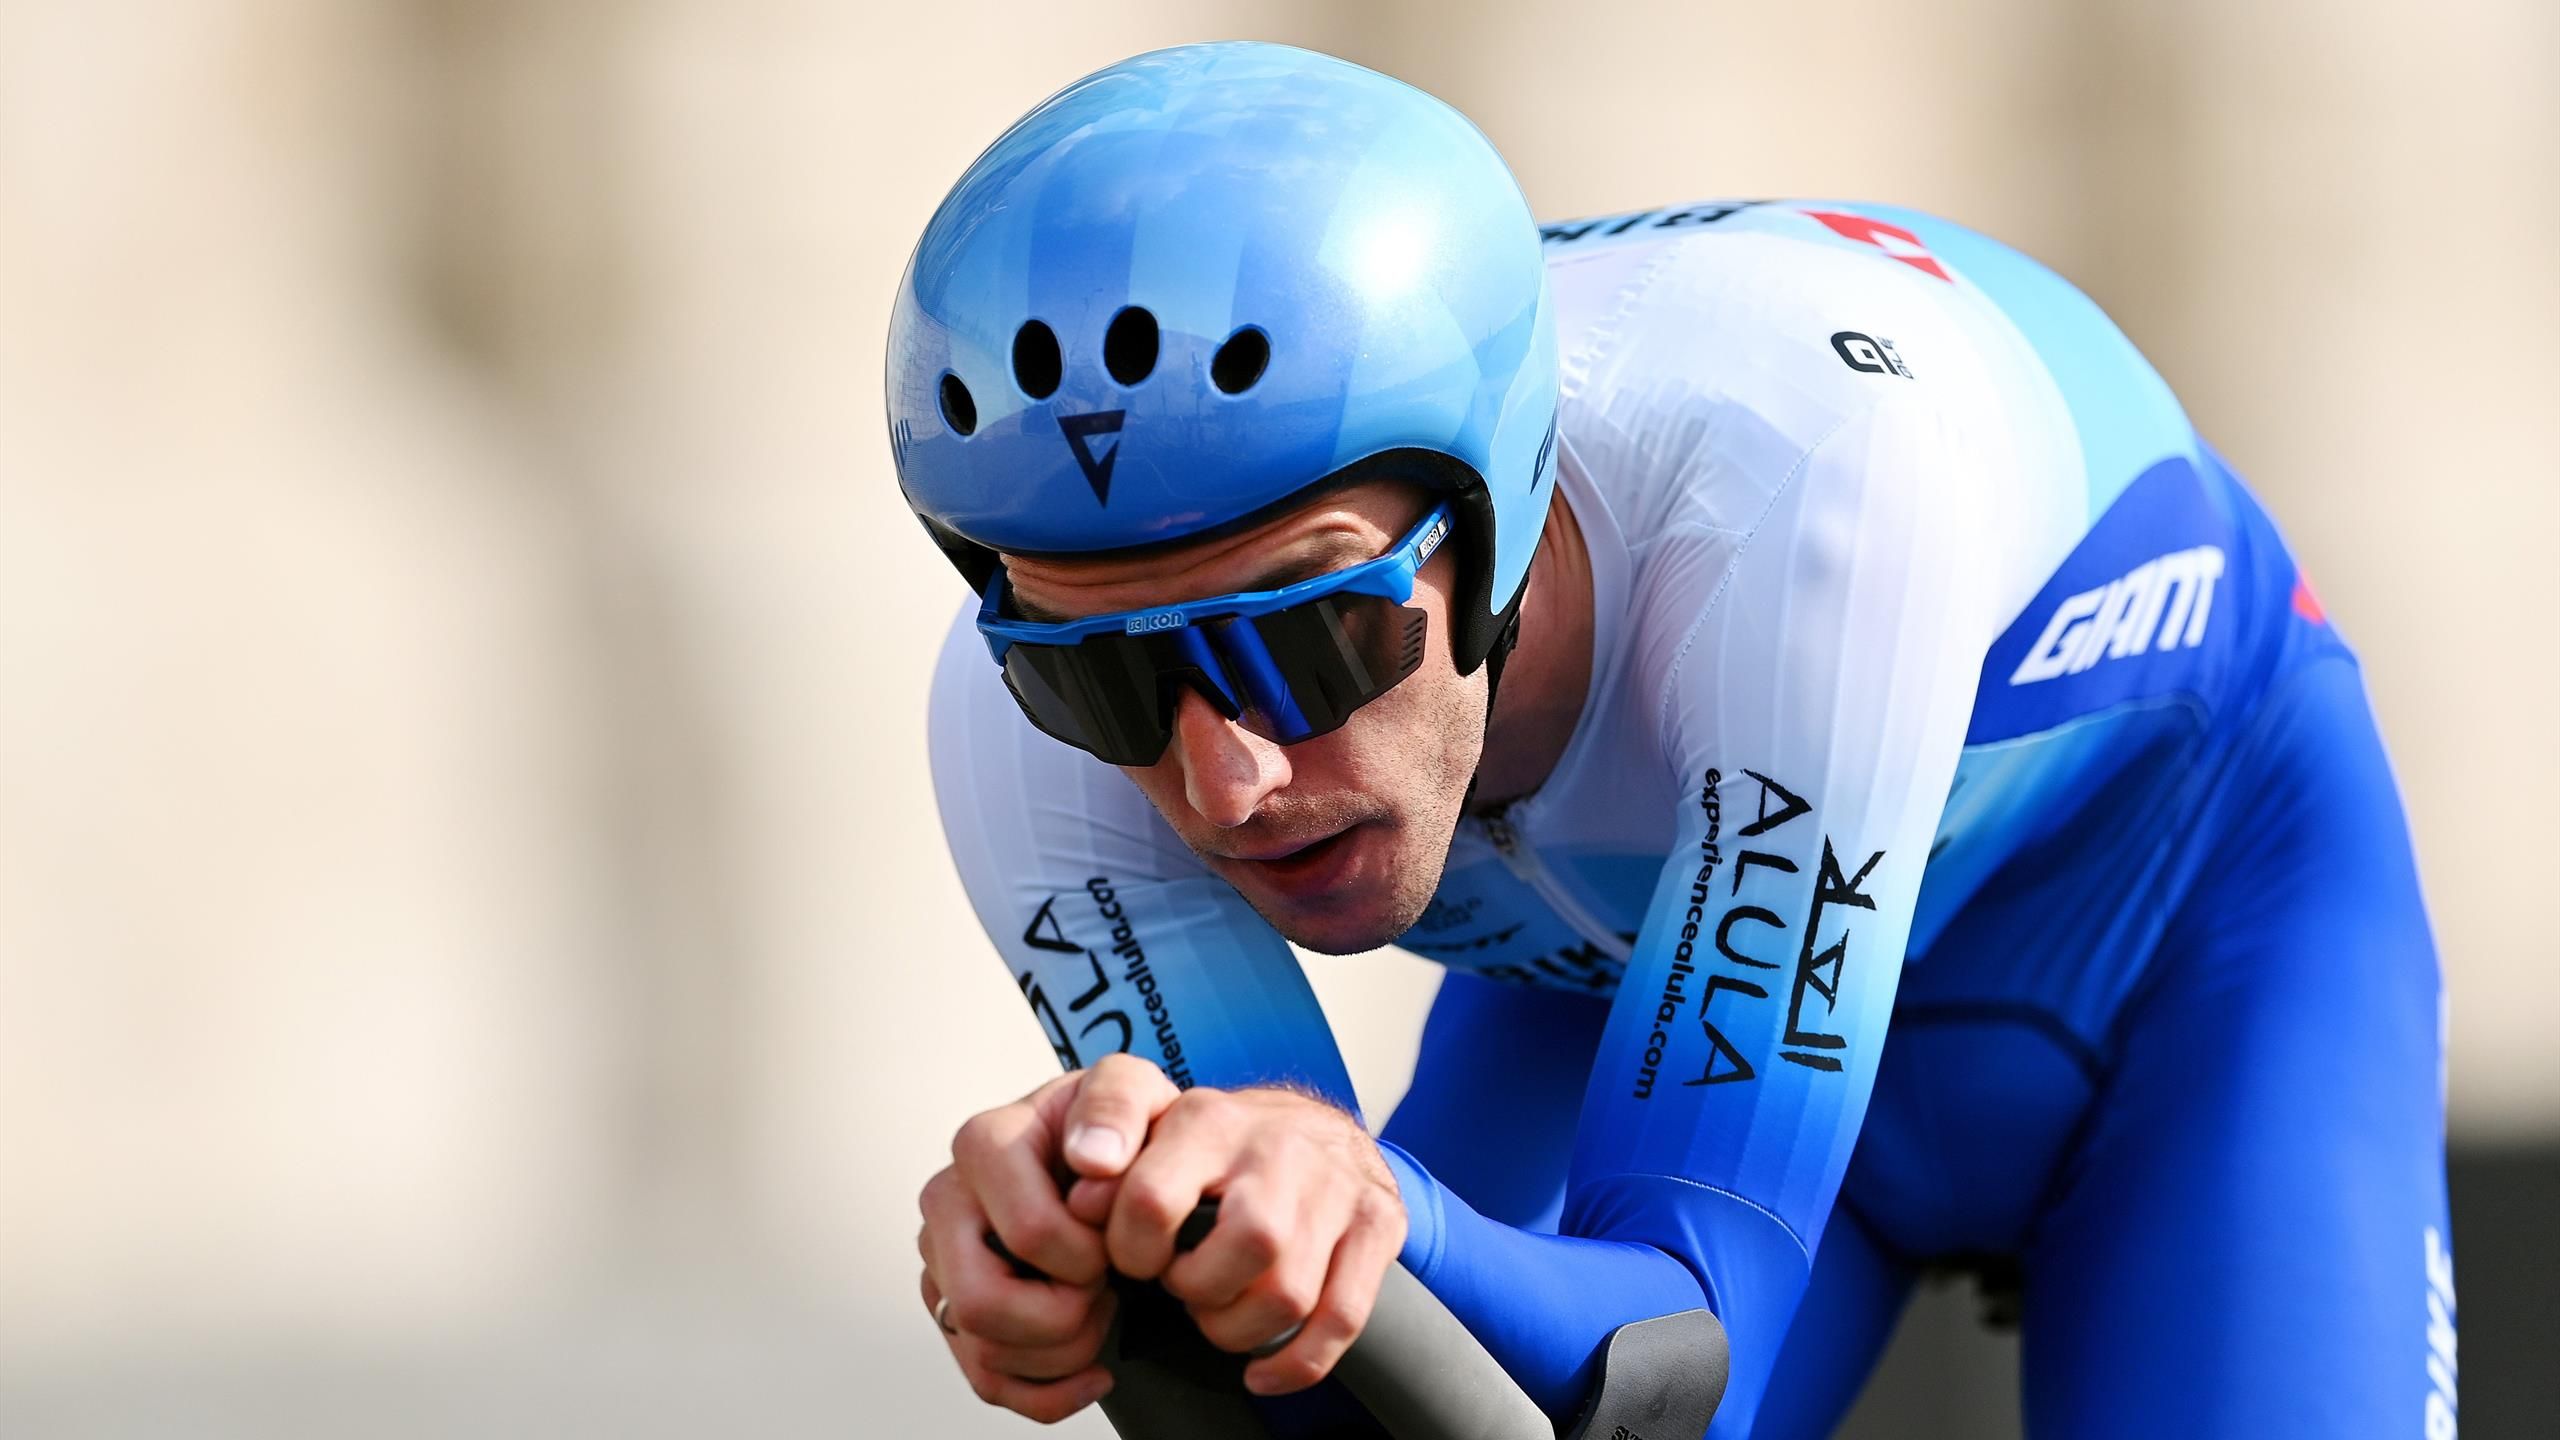 Giro dItalia 2022 Stage 2 as it happened - Simon Yates wins Individual time trial in Budapest to boost GC chances